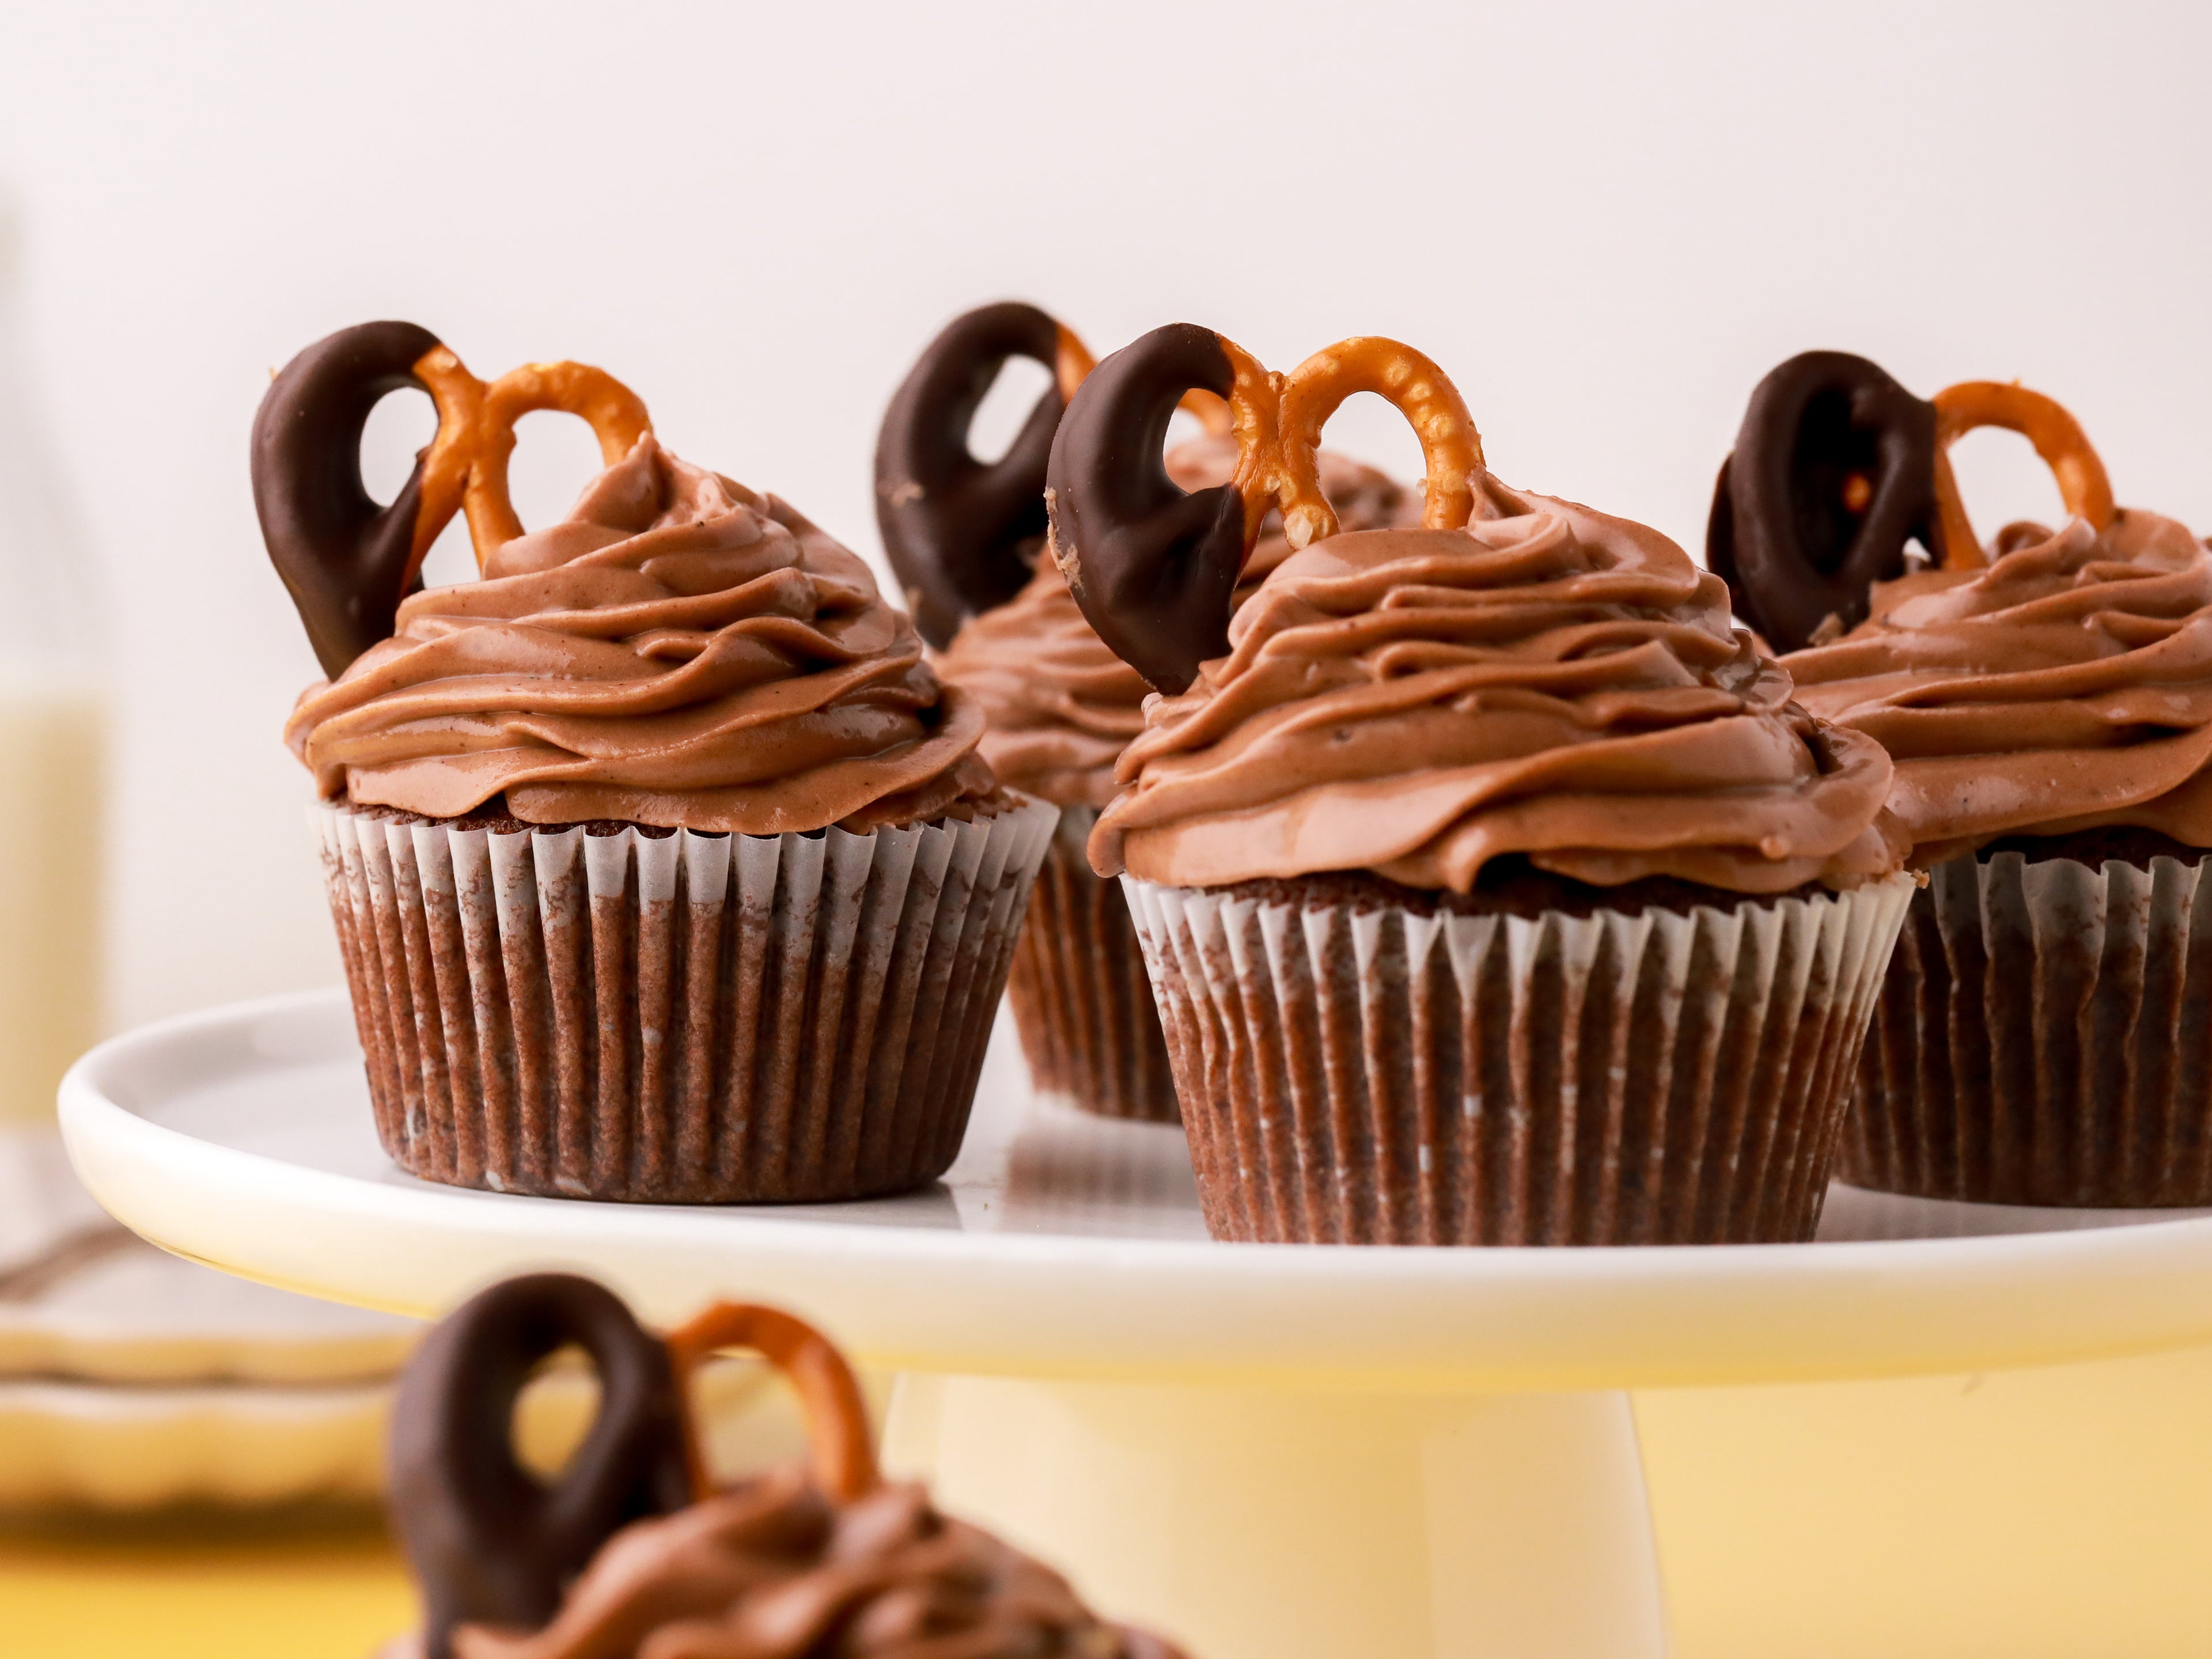 Chocolate cupcakes topped with pretzels